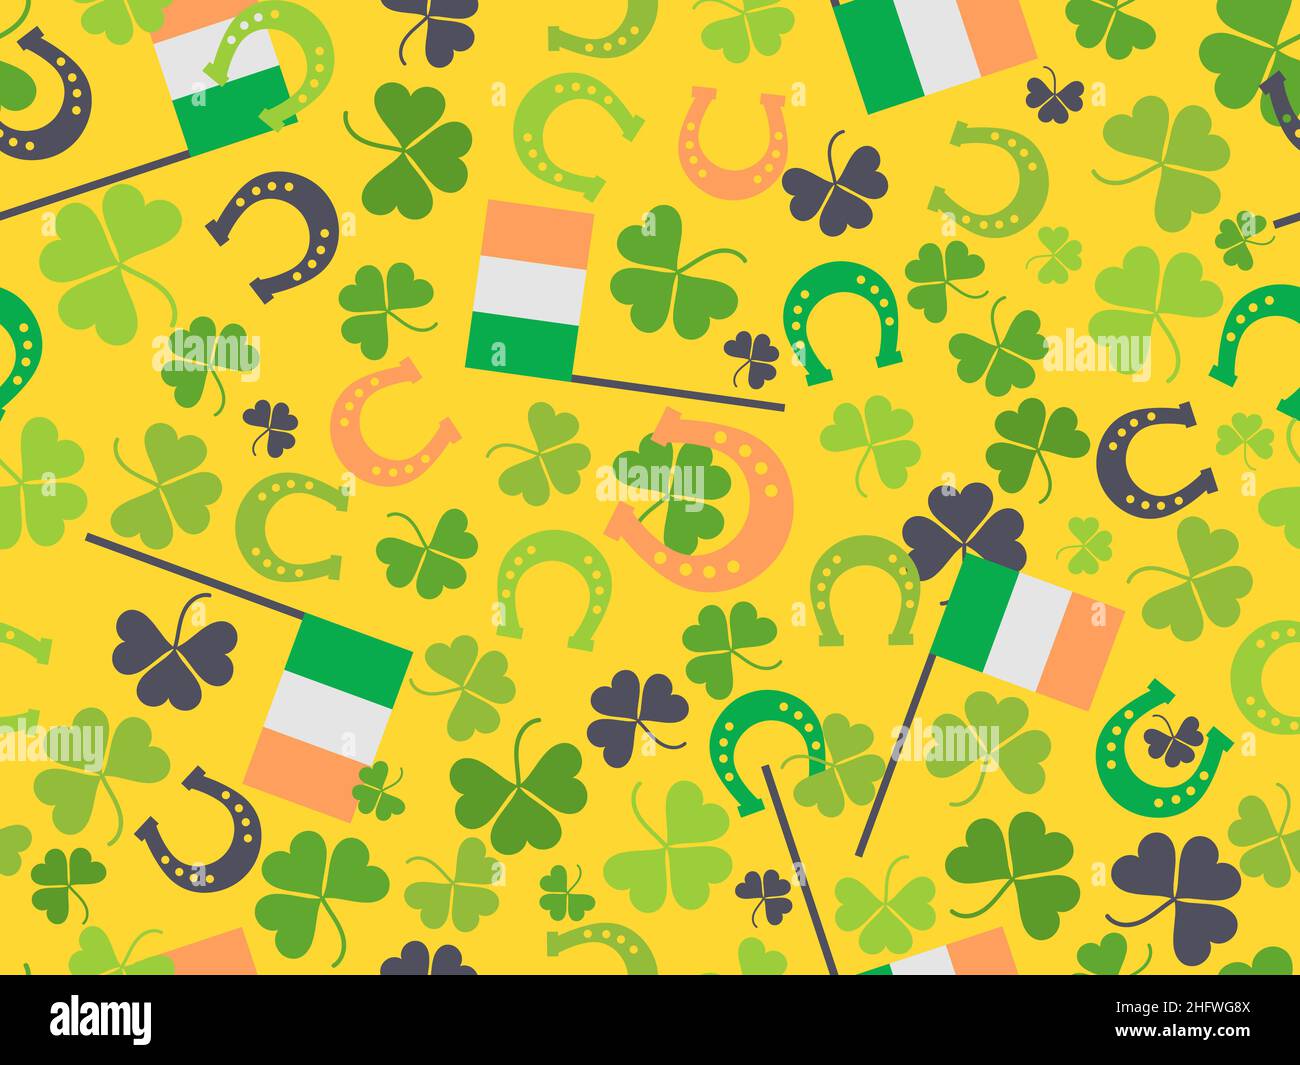 Seamless pattern with clovers, horseshoes and Irish flags. Festive background for St. Patrick's Day for advertising products, postcards and printing. Stock Vector